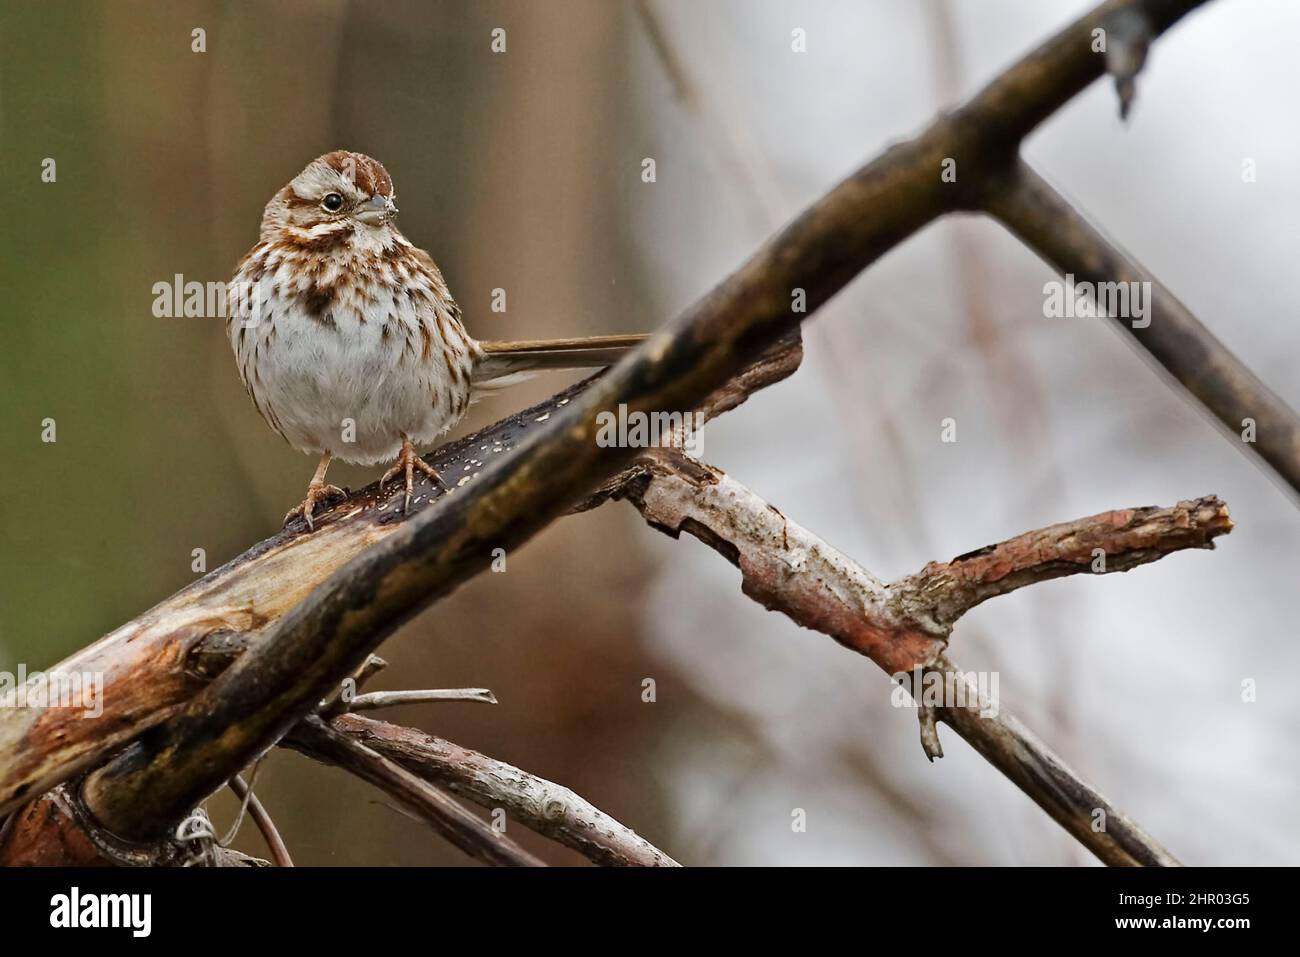 A Song Sparrow, Melospiza melodia, perched in a tree Stock Photo